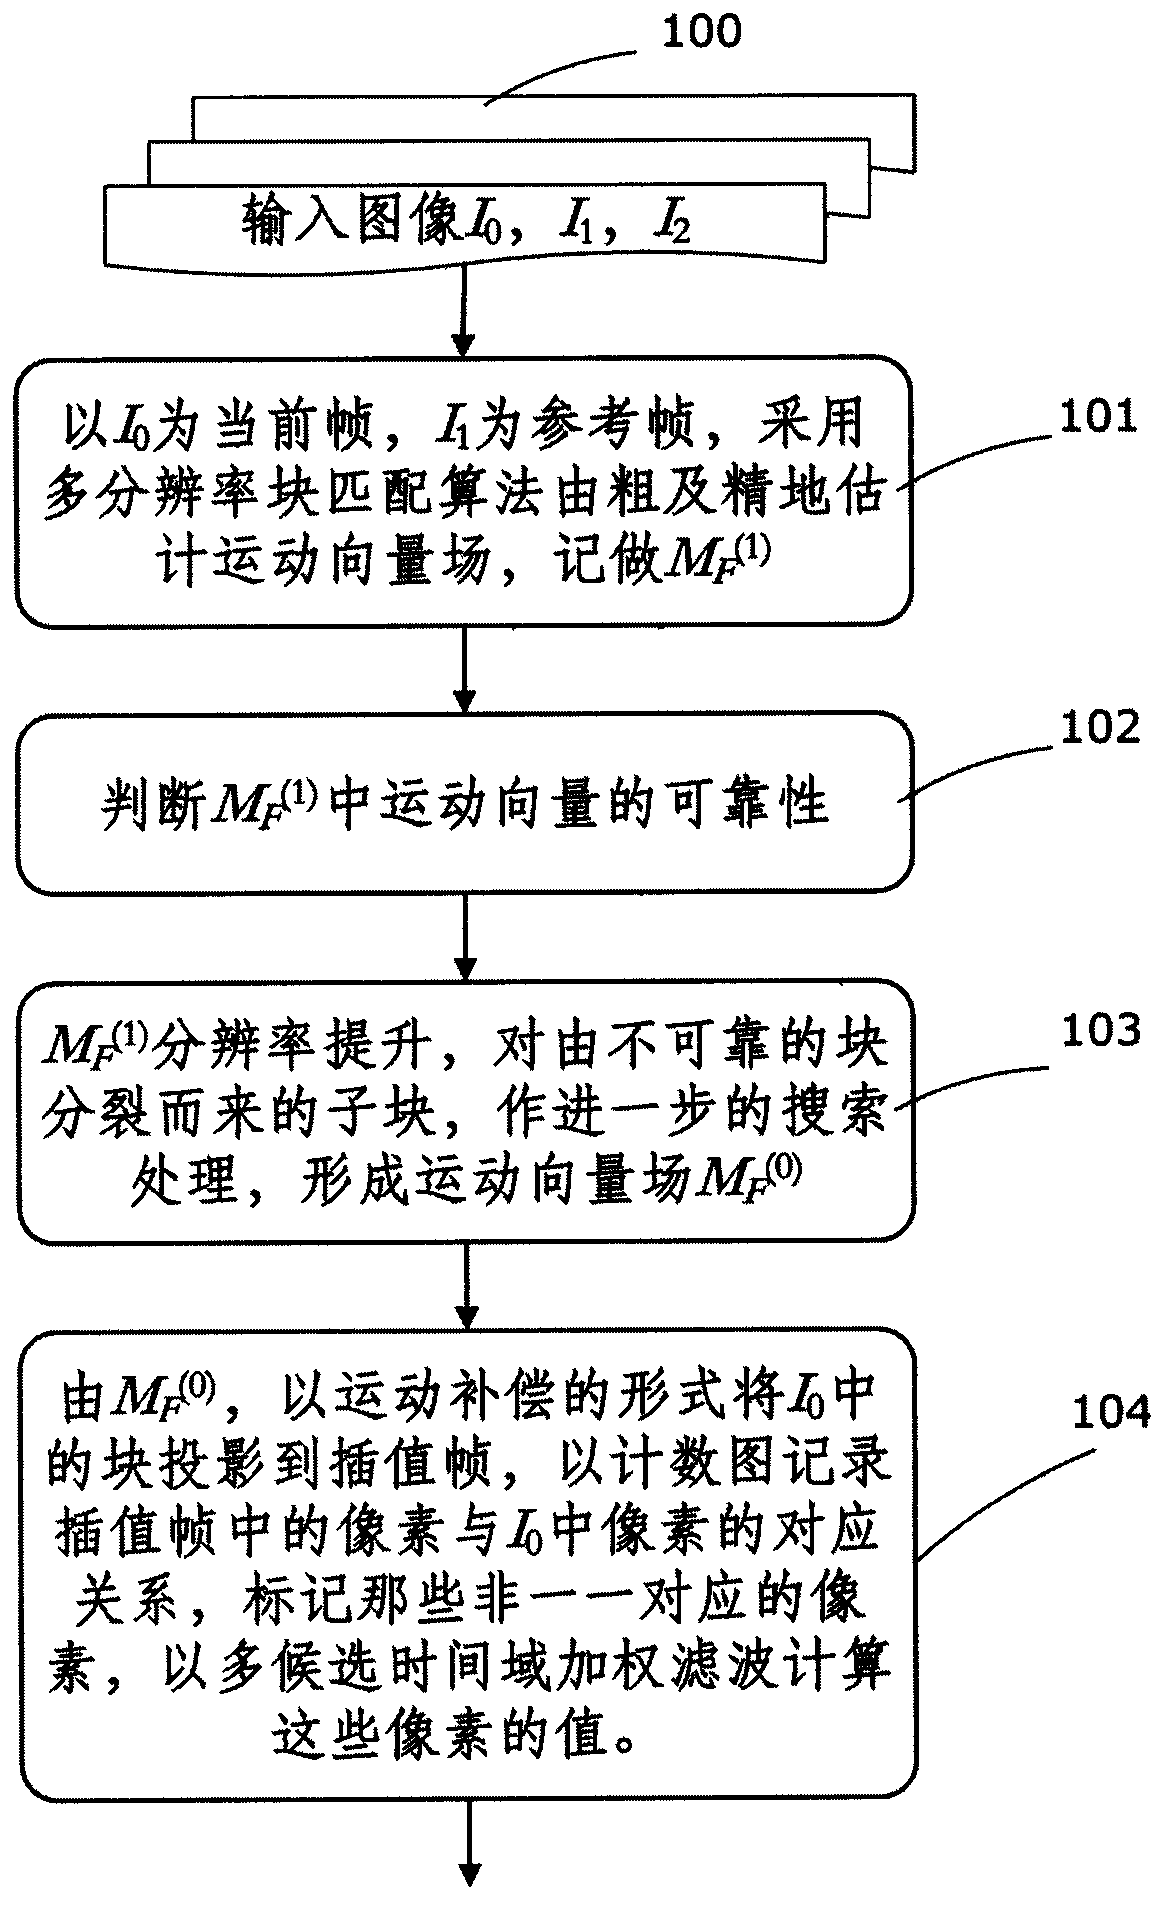 Interpolation frame generating method applied to up-conversion of video frame rate